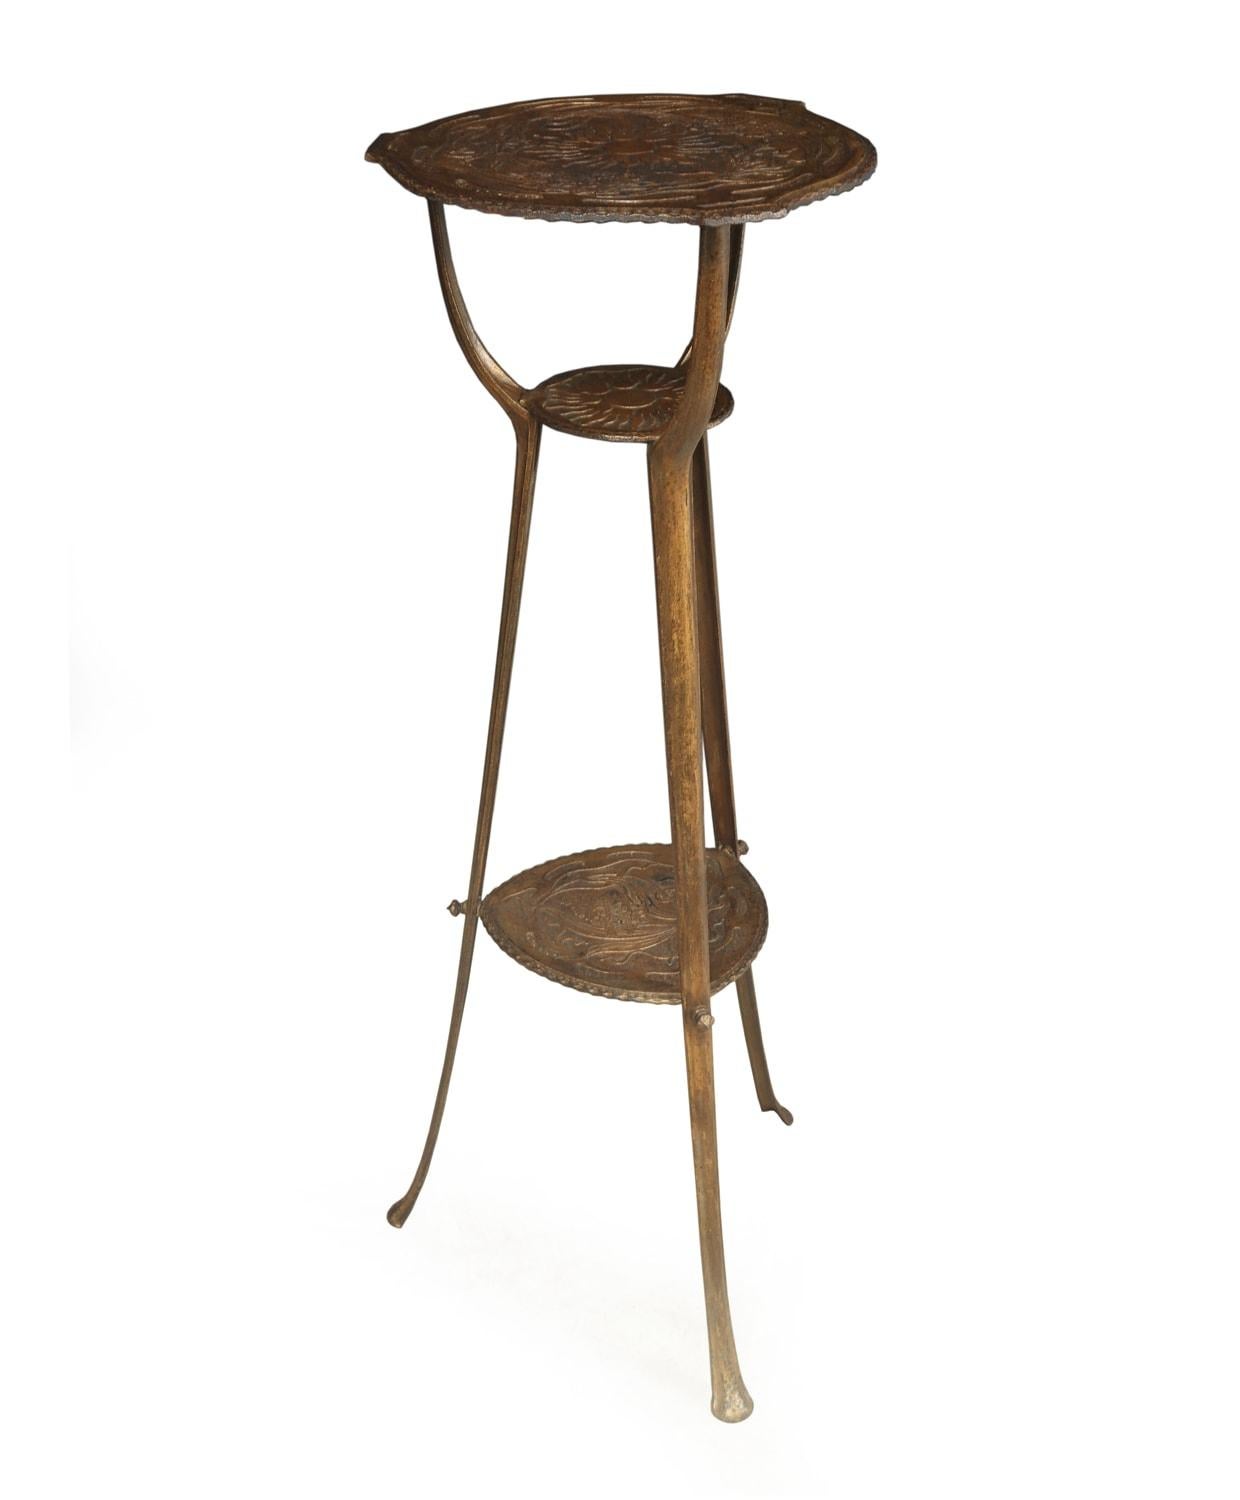 Art Nouveau cast iron jardinière stand

A cast and patinated plant stand produce around the turn of the 19th-20th century with decorative pressed tops, each section is marked with the same number 6452 including the large top but this also has the